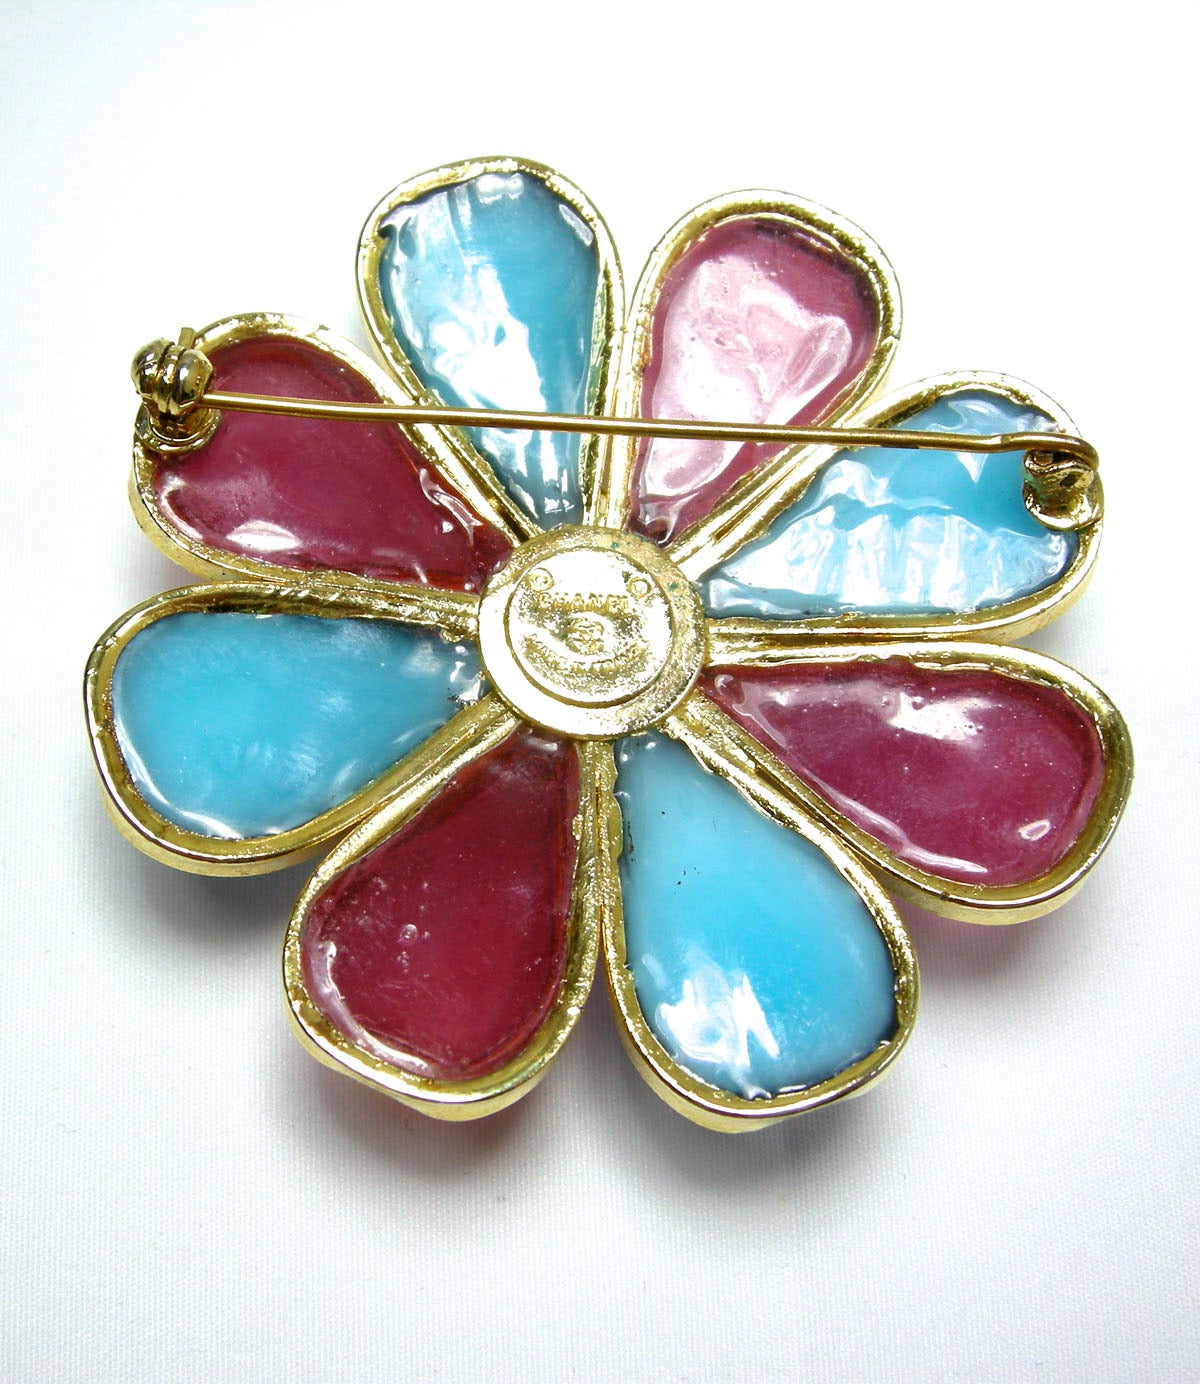 I love these vintage Chanel Gripoix pins.  They are so hard to find and this one is a true beauty.  It ha a floral design with turquoise and pink Gripoix petals encrusted with gold tone metal.  There is a square shaped yellow Gripoix glass in the